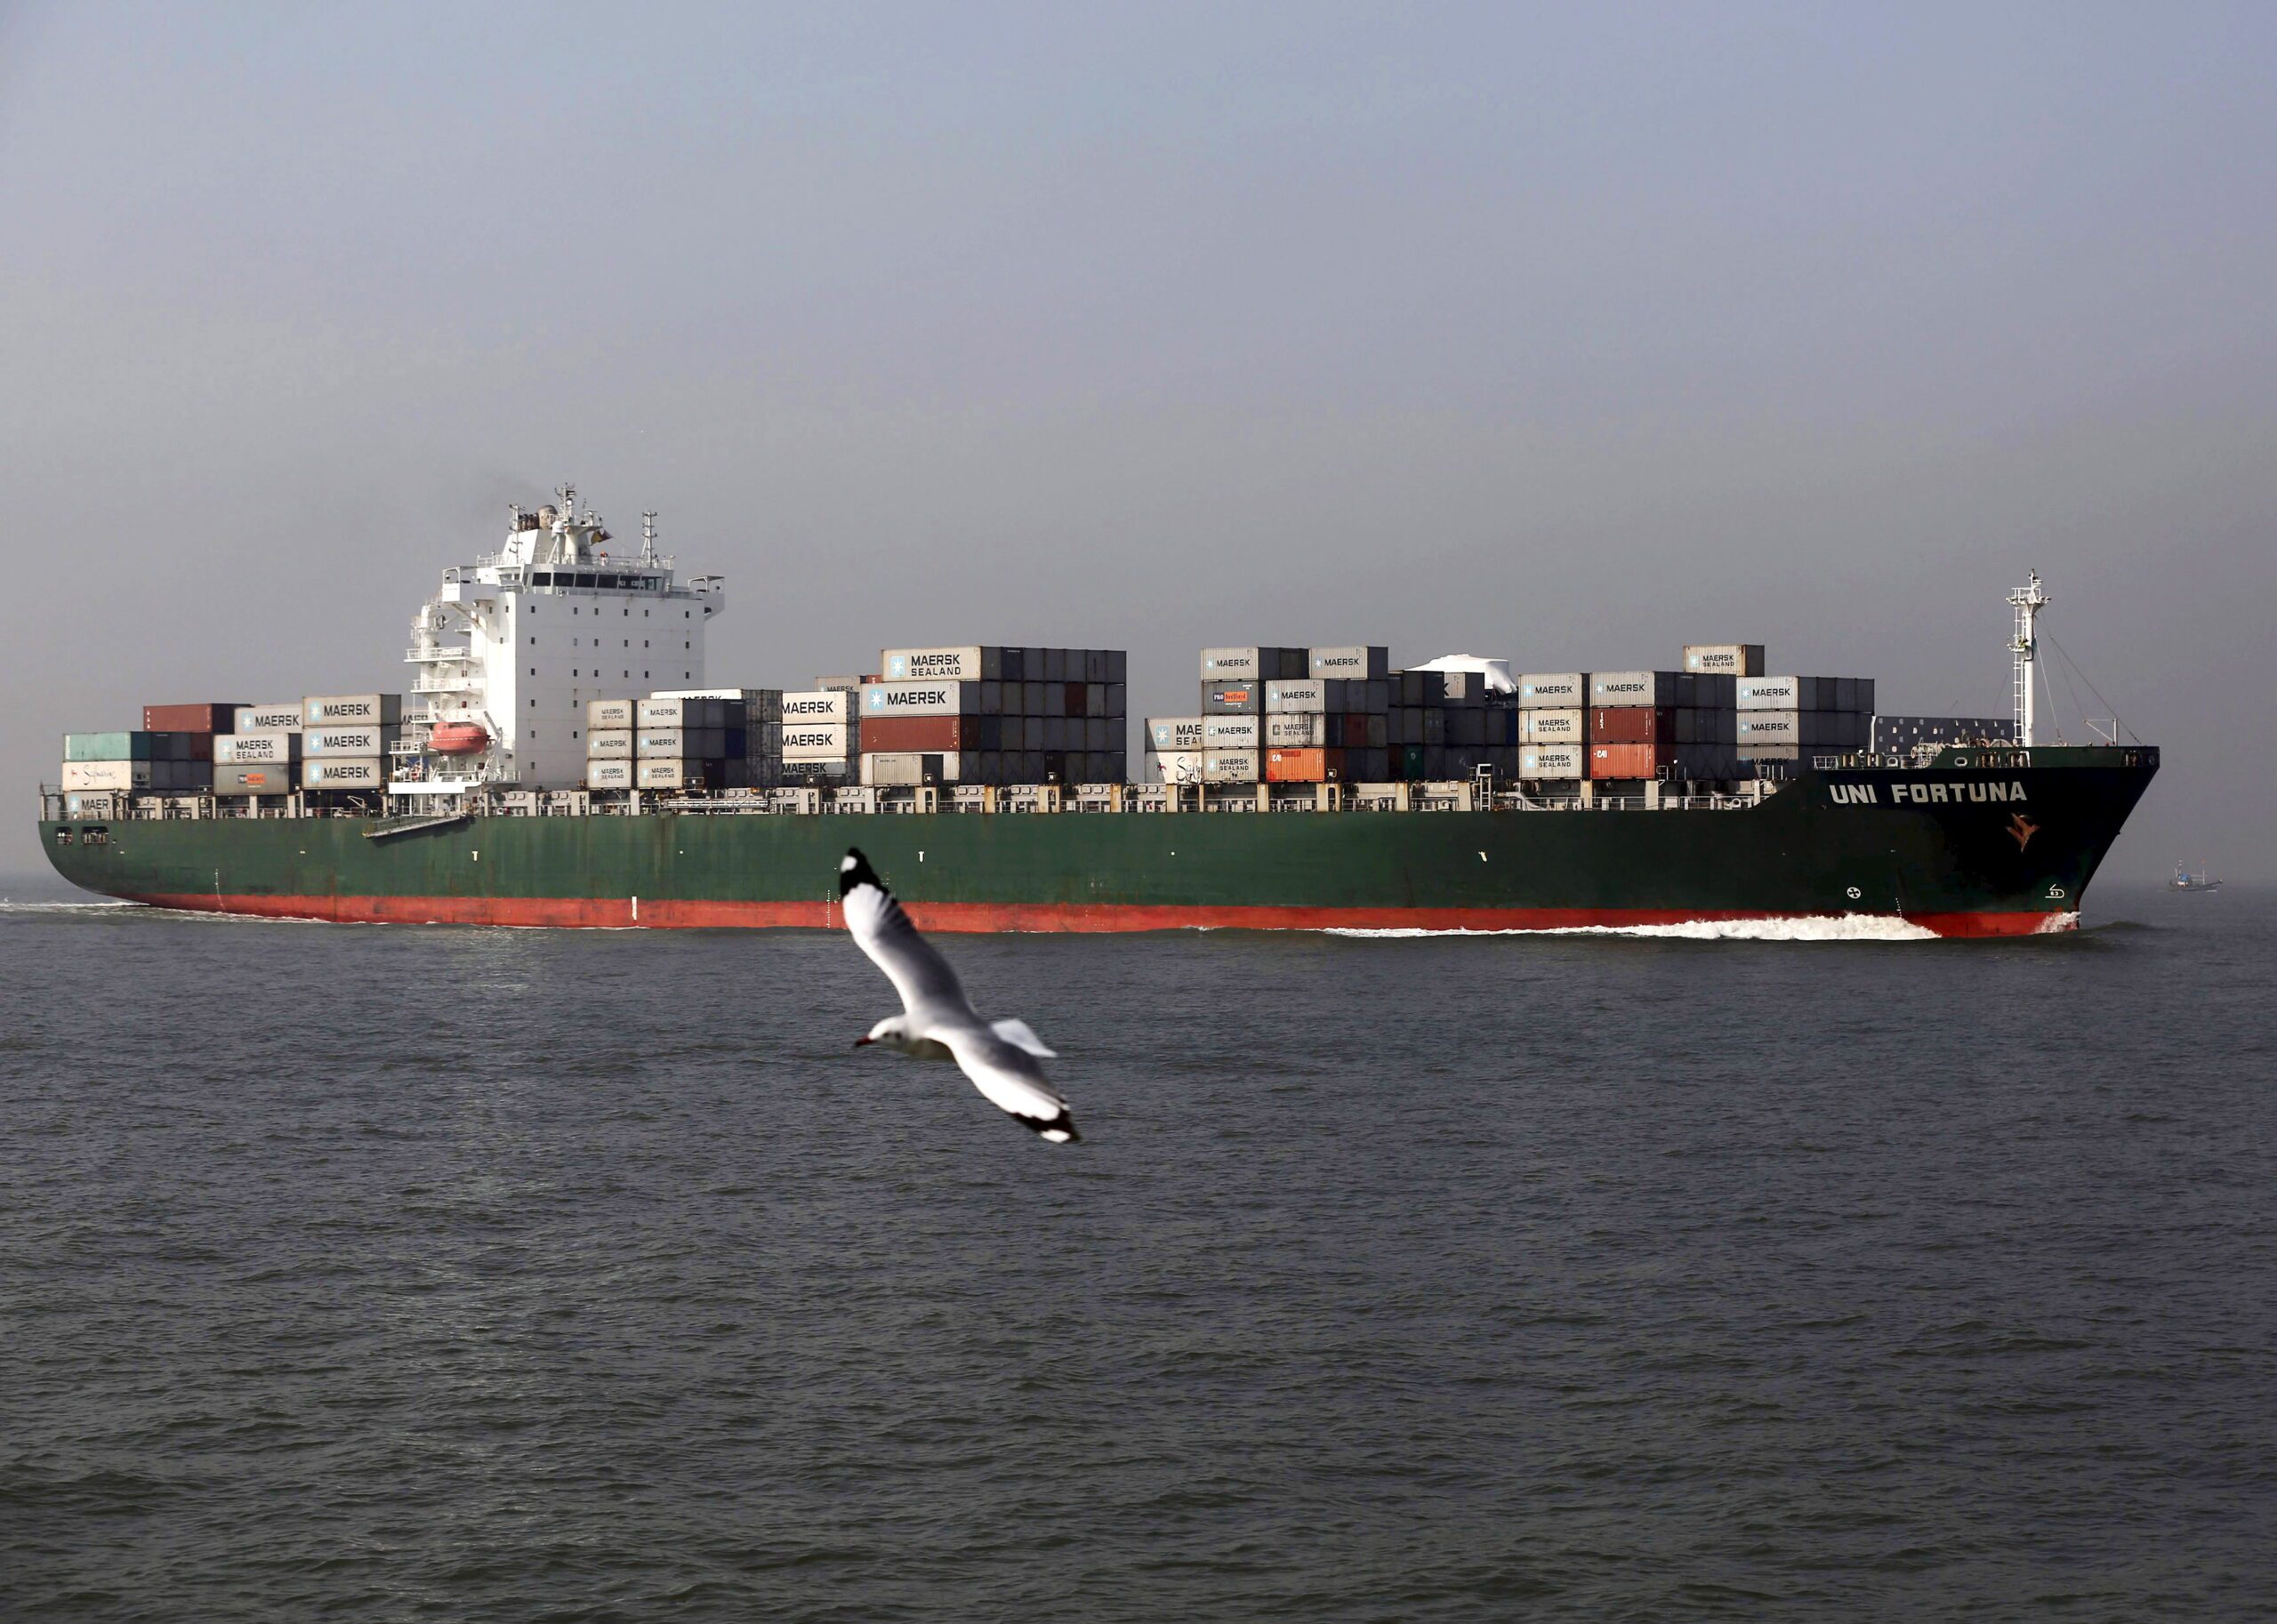 A seagull flies past a cargo container ship off the coast of Mumbai, India, December 3, 2015. REUTERS/Shailesh Andrade